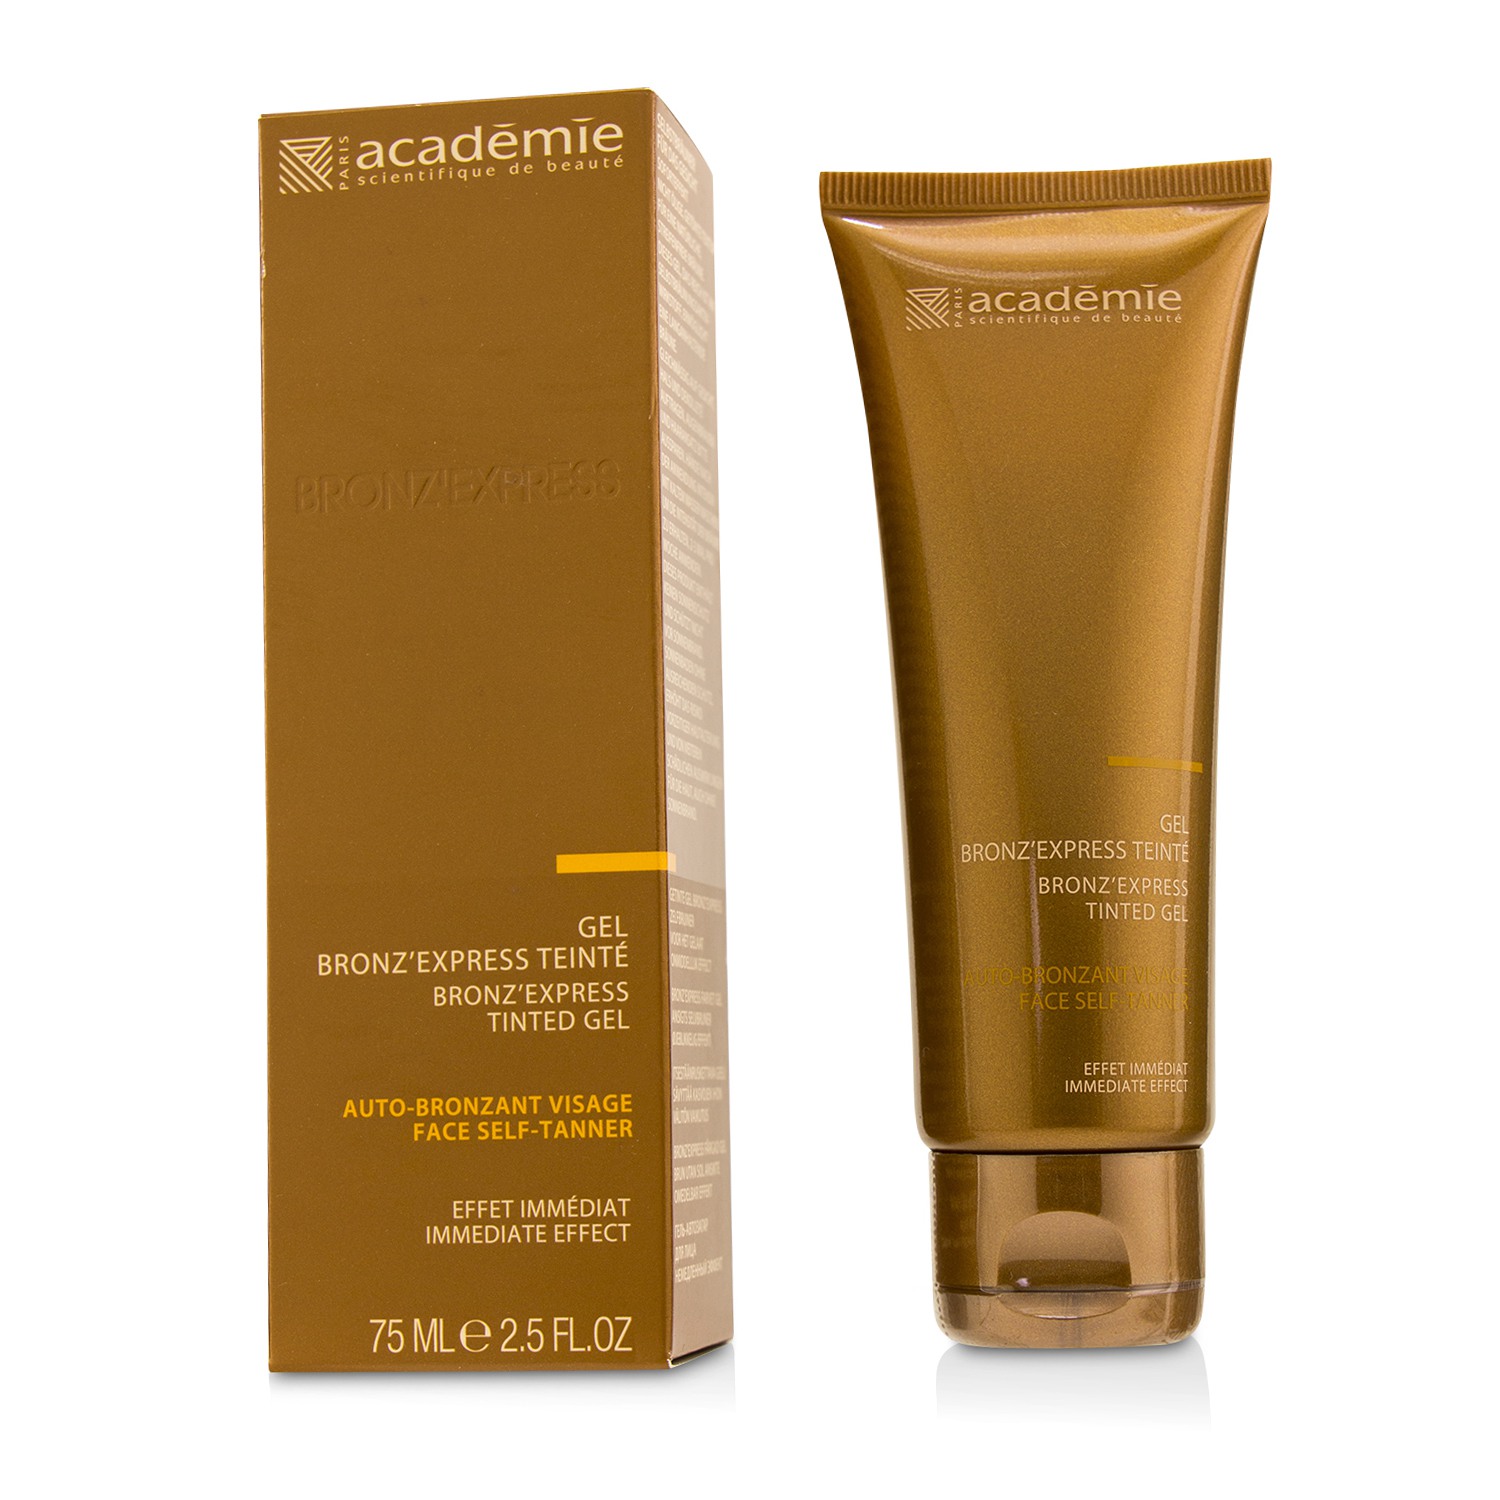 Bronz Express Face Self-Tanner Tinted Gel Academie Image